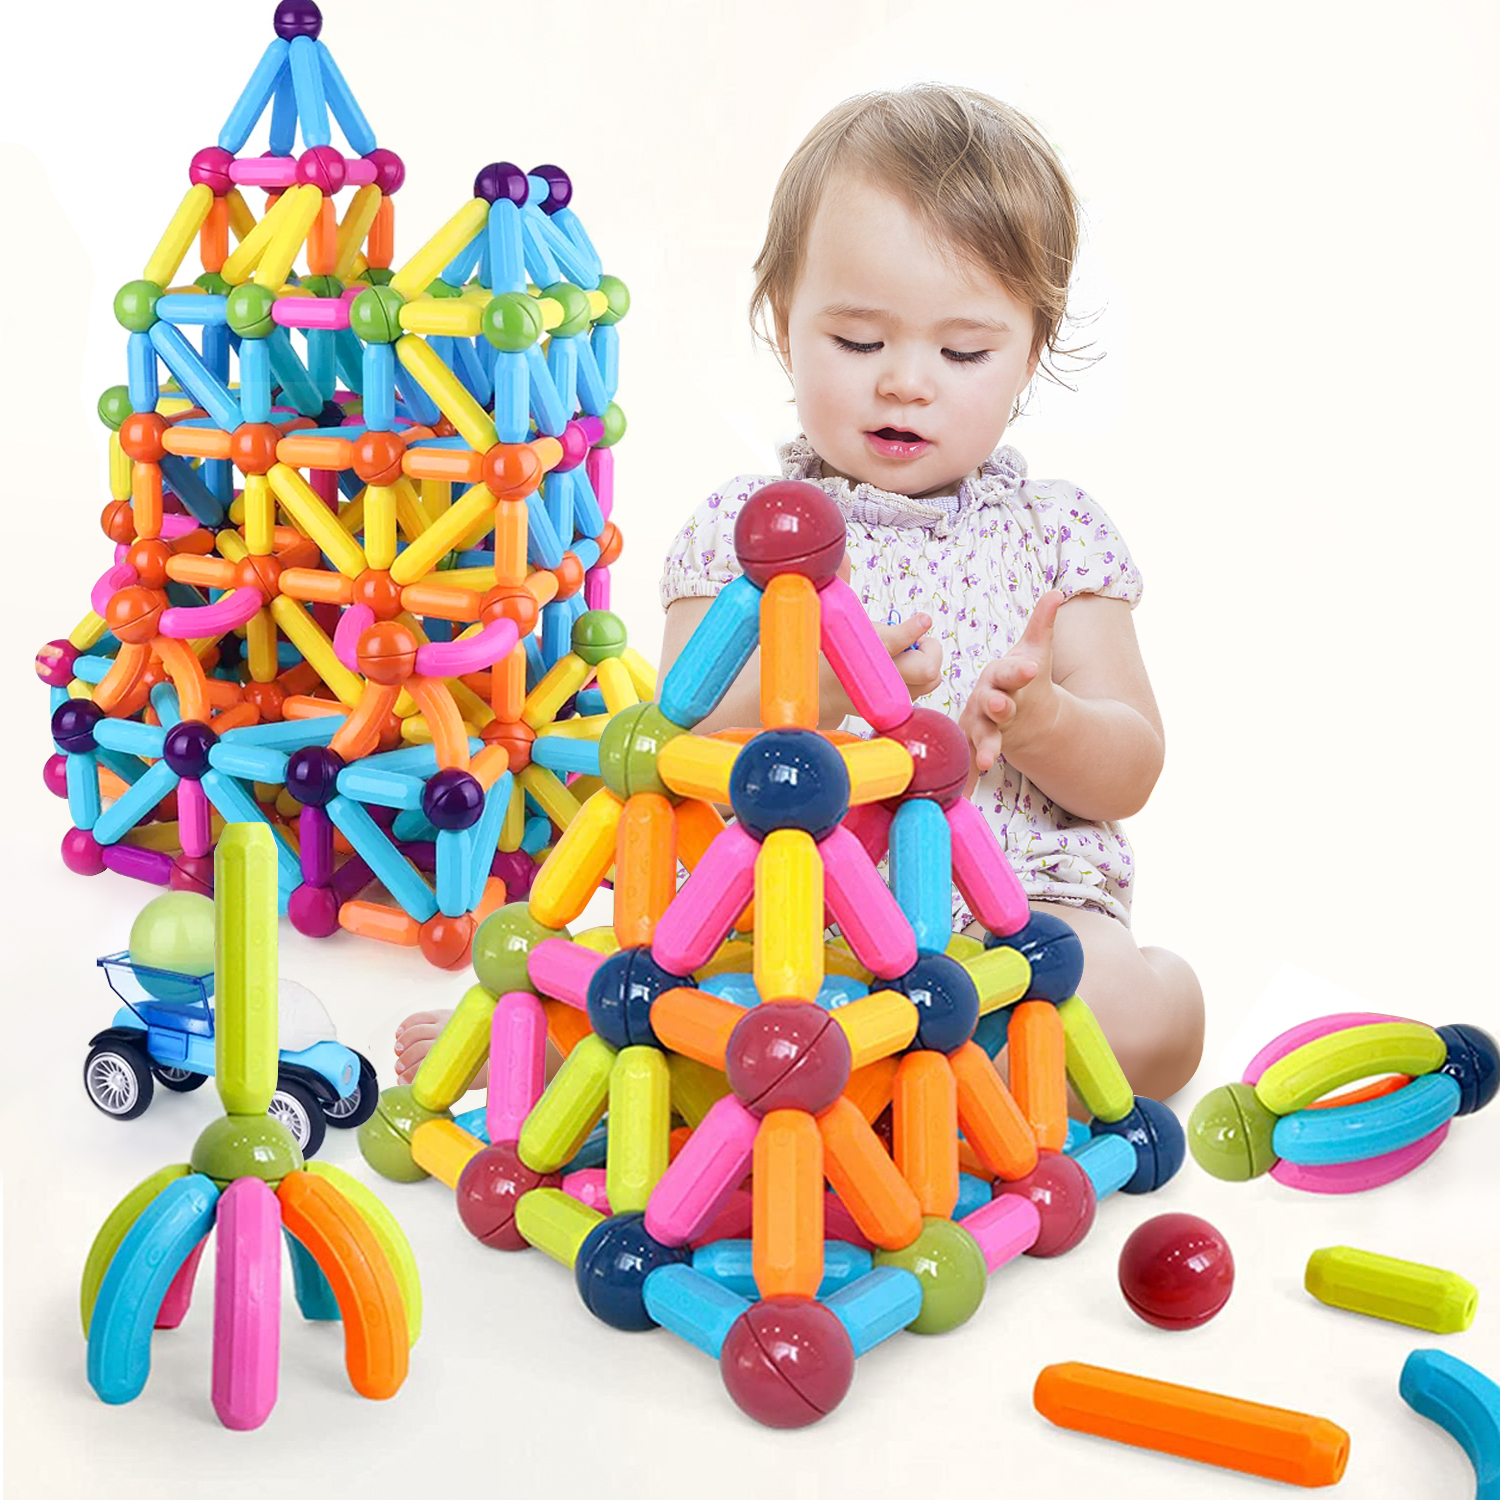 Educational Toys for Children Ages 3+
